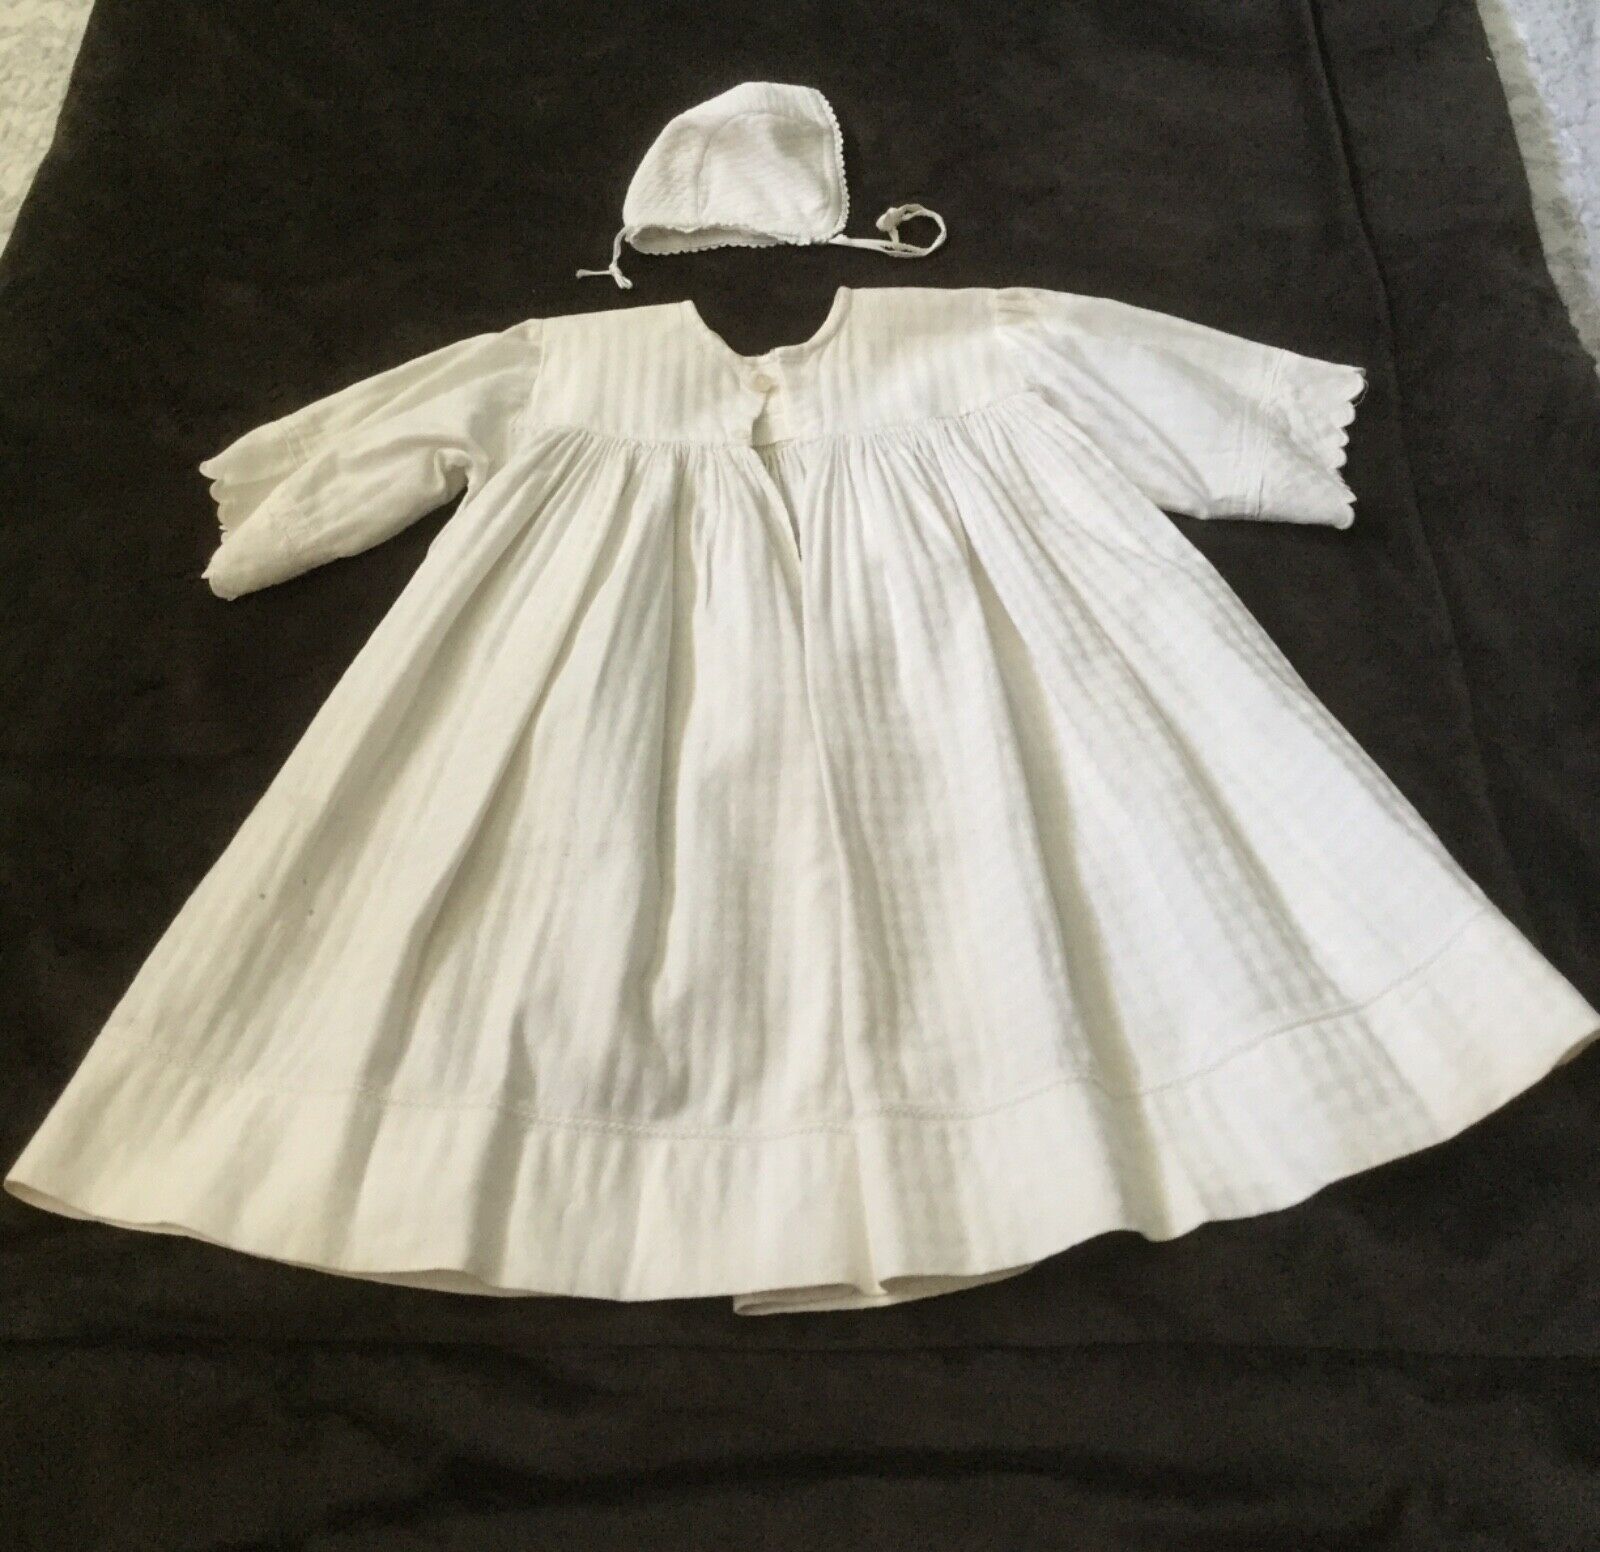 Antique French Victorian Edwardian Baby handmade Gown and cap. Baby or Doll